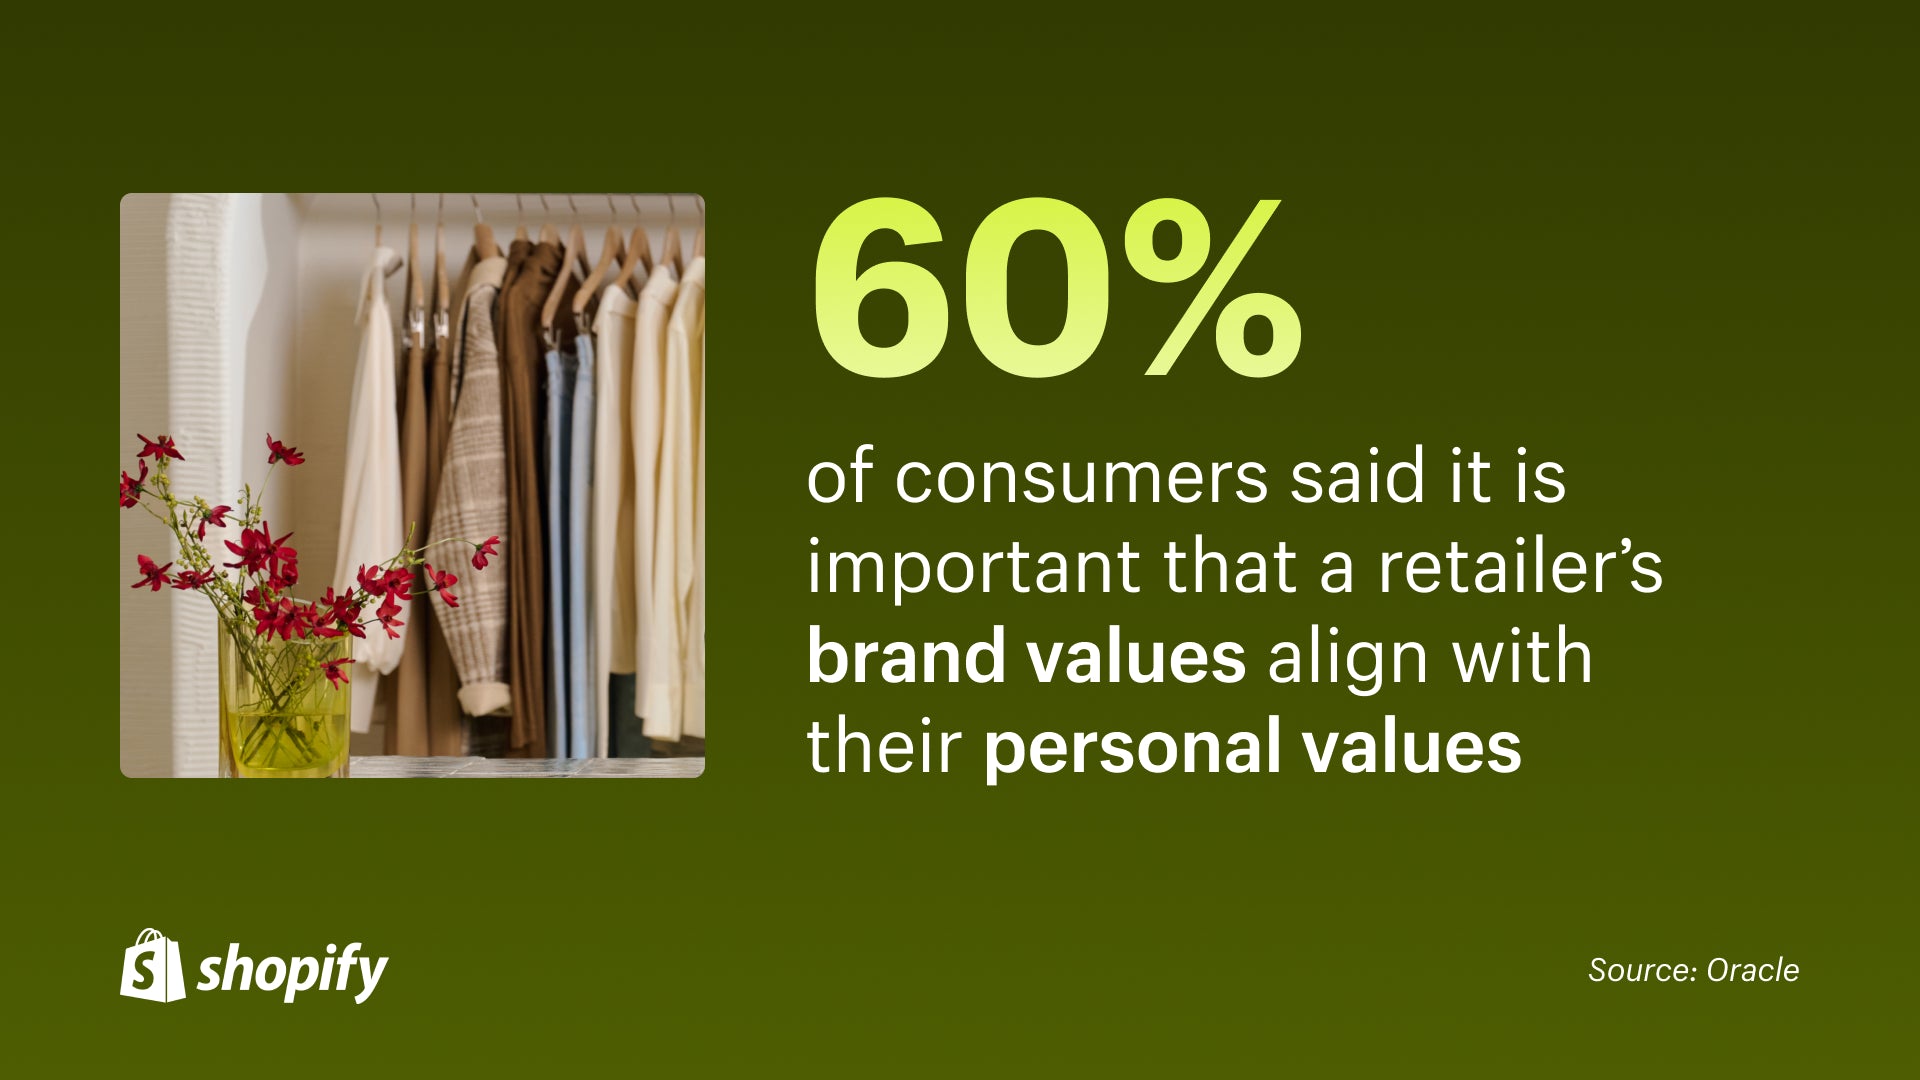 Green background with an image on the left of clothing hanging on a rack and to the right a statistic that reads, '60% of consumers said it is important that a retailer's brand values align with their personal values.'